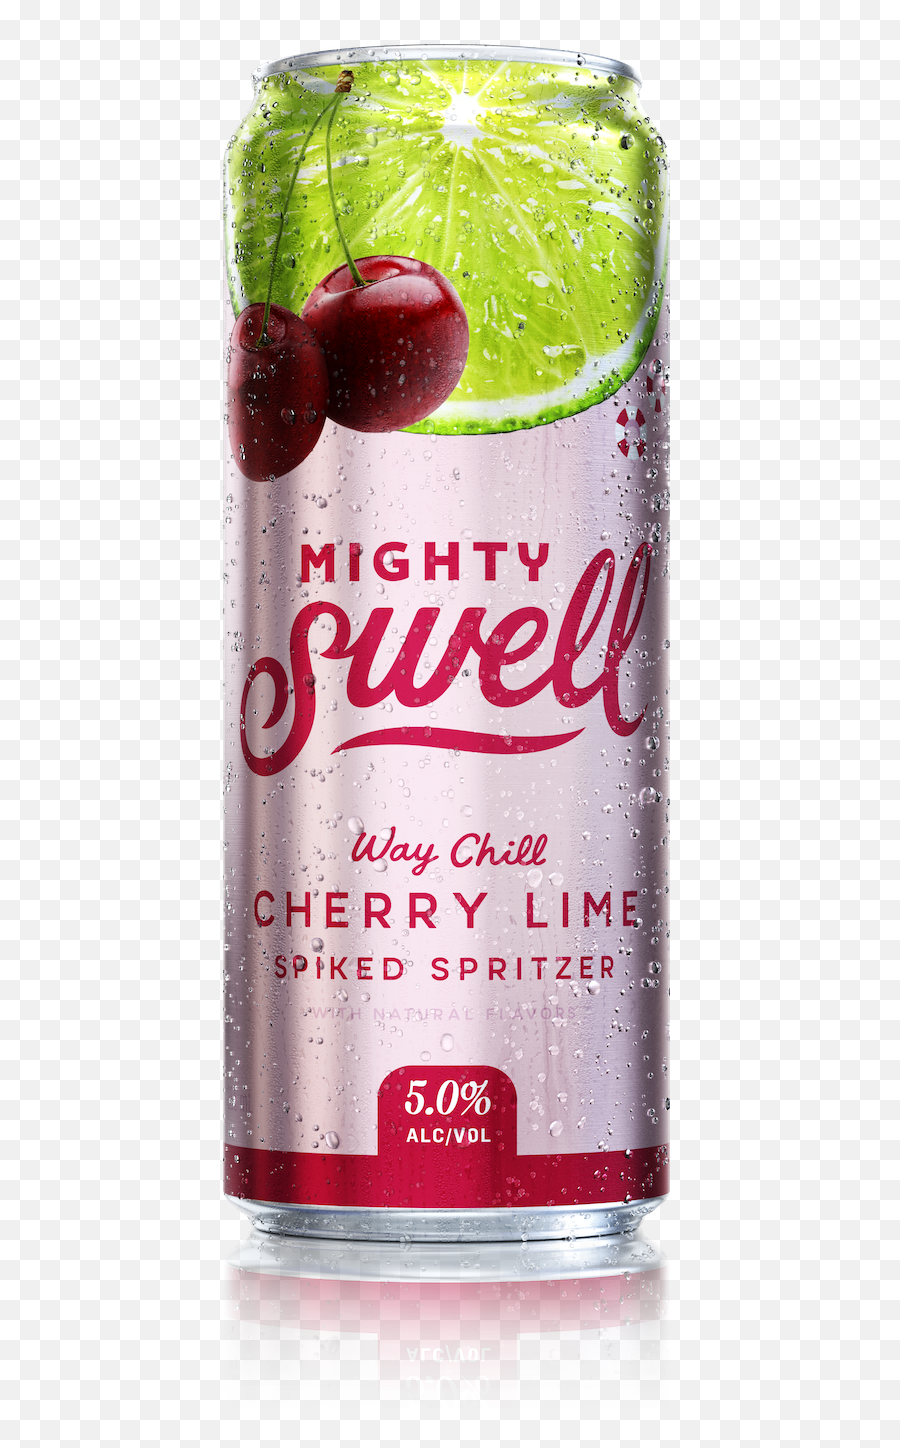 Mighty Swell Spritzer Co Launches Cherry Lime Flavor - Mighty Swell Cherry Lime Emoji,Cherry Facebook Emoticon